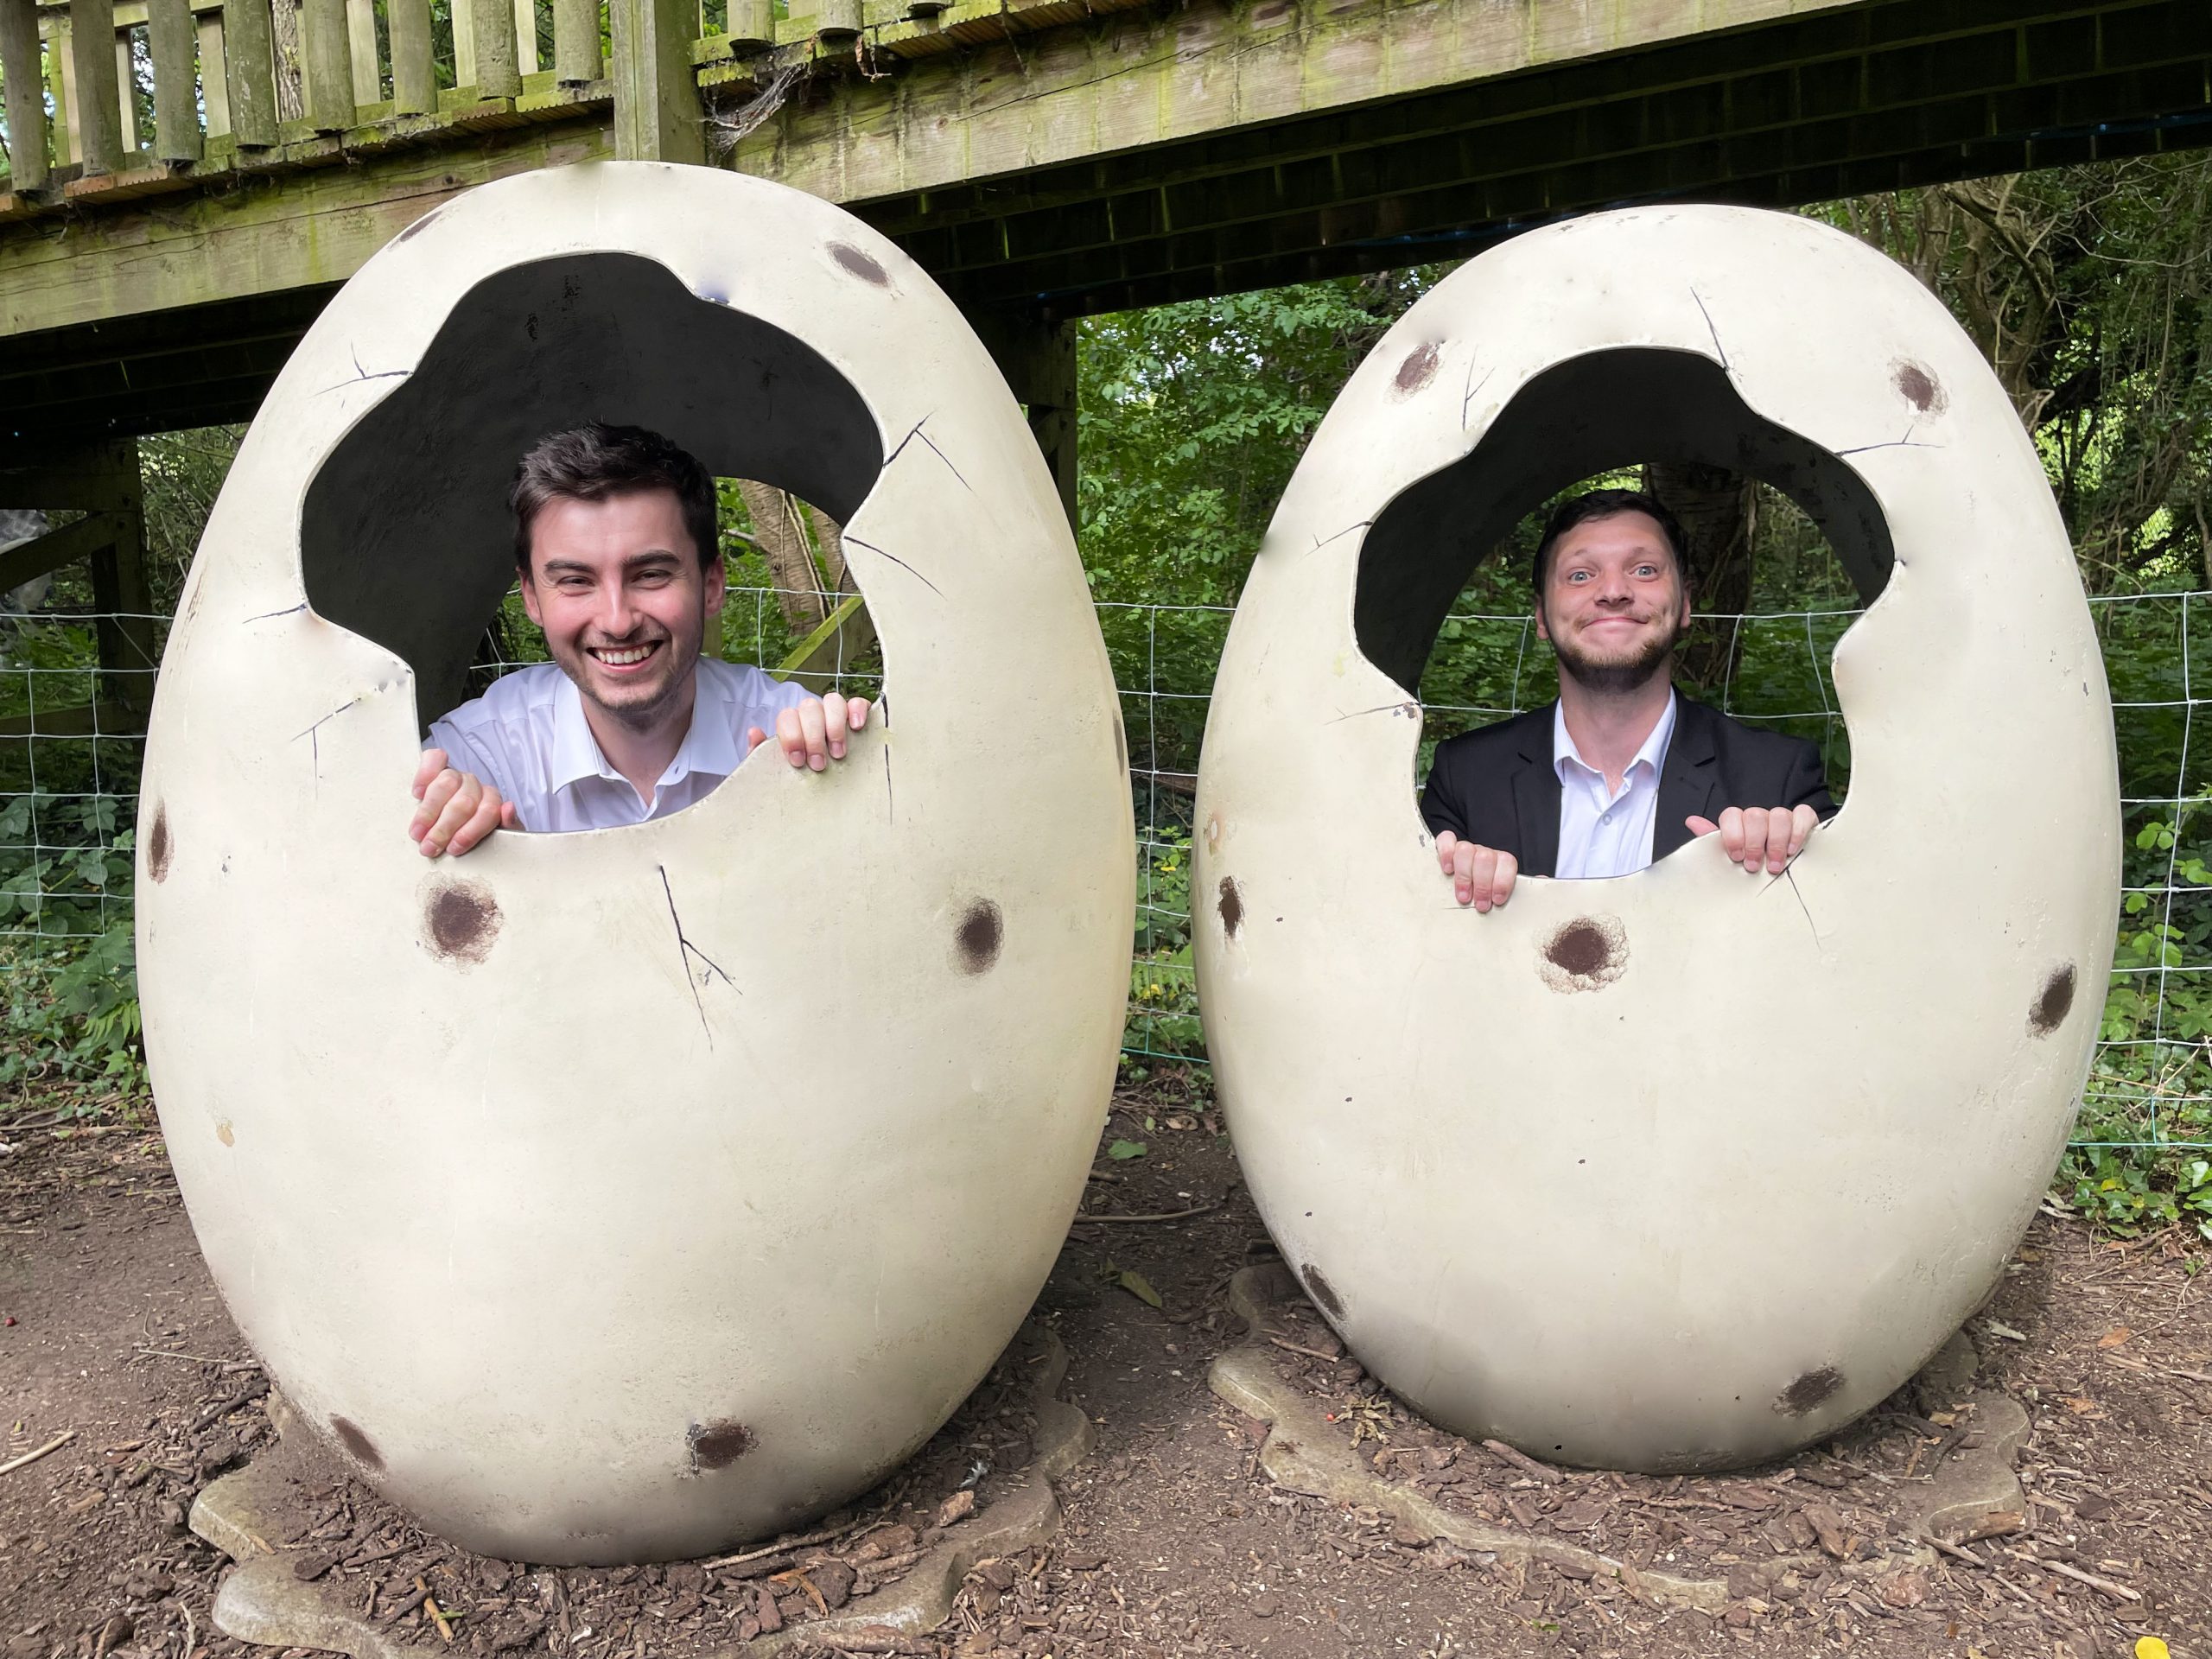 Gulliver’s kickstarts theme park careers for James and George